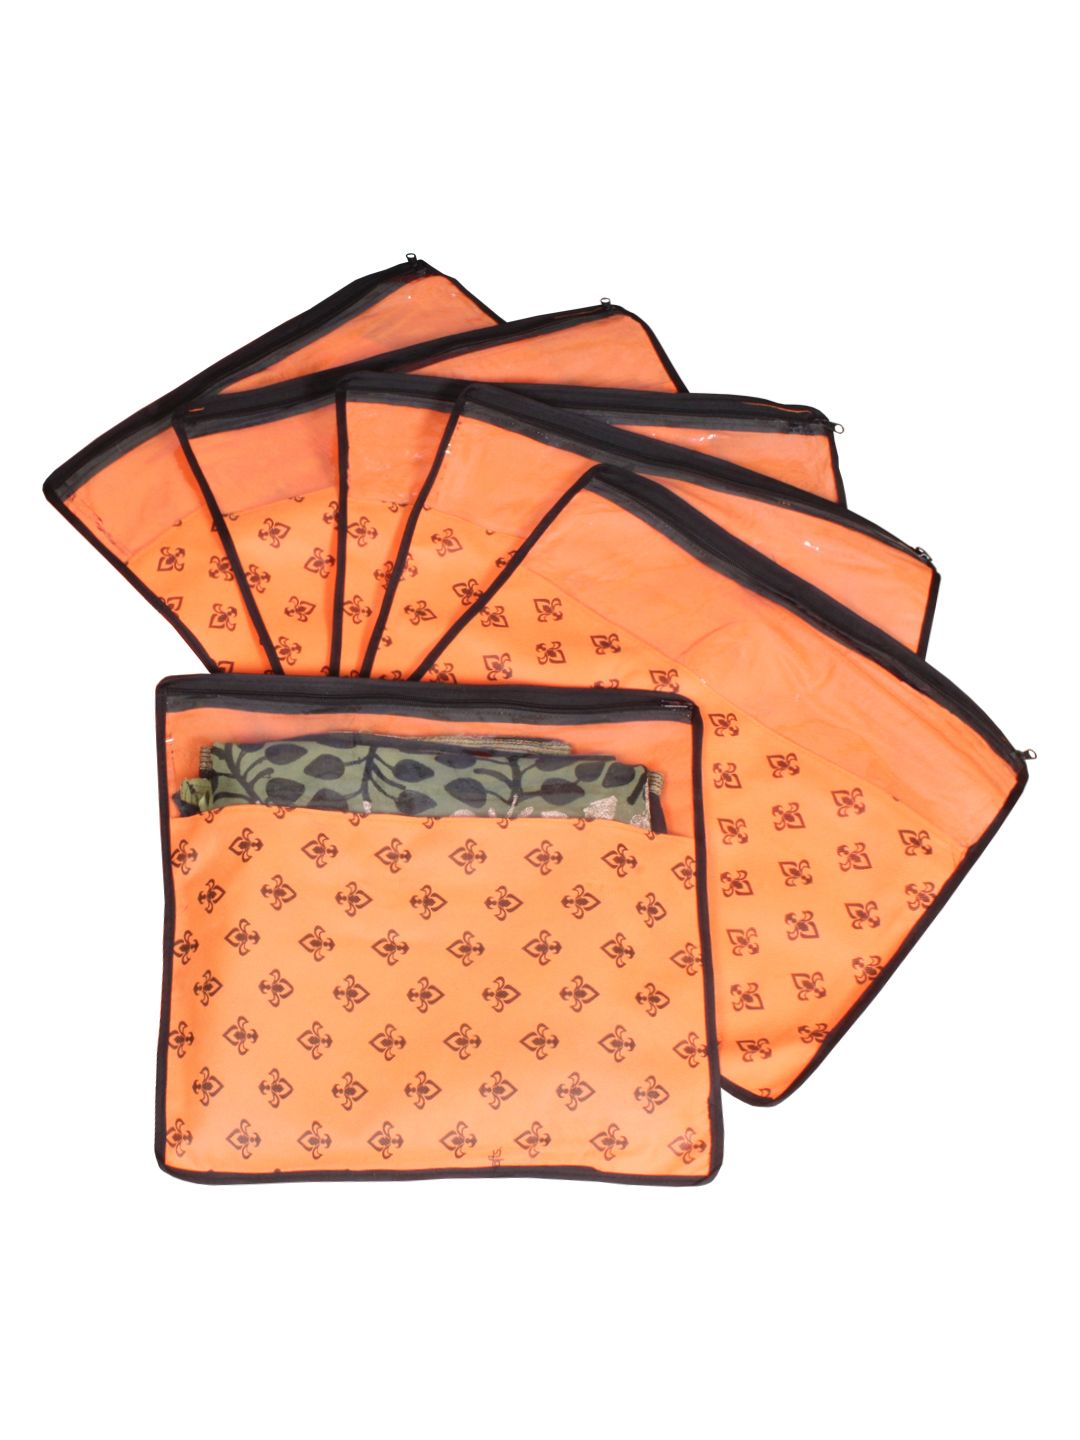 PrettyKrafts Set Of 6 Orange & Top Transparent Solid Single Packing Saree Cover Organizers Price in India